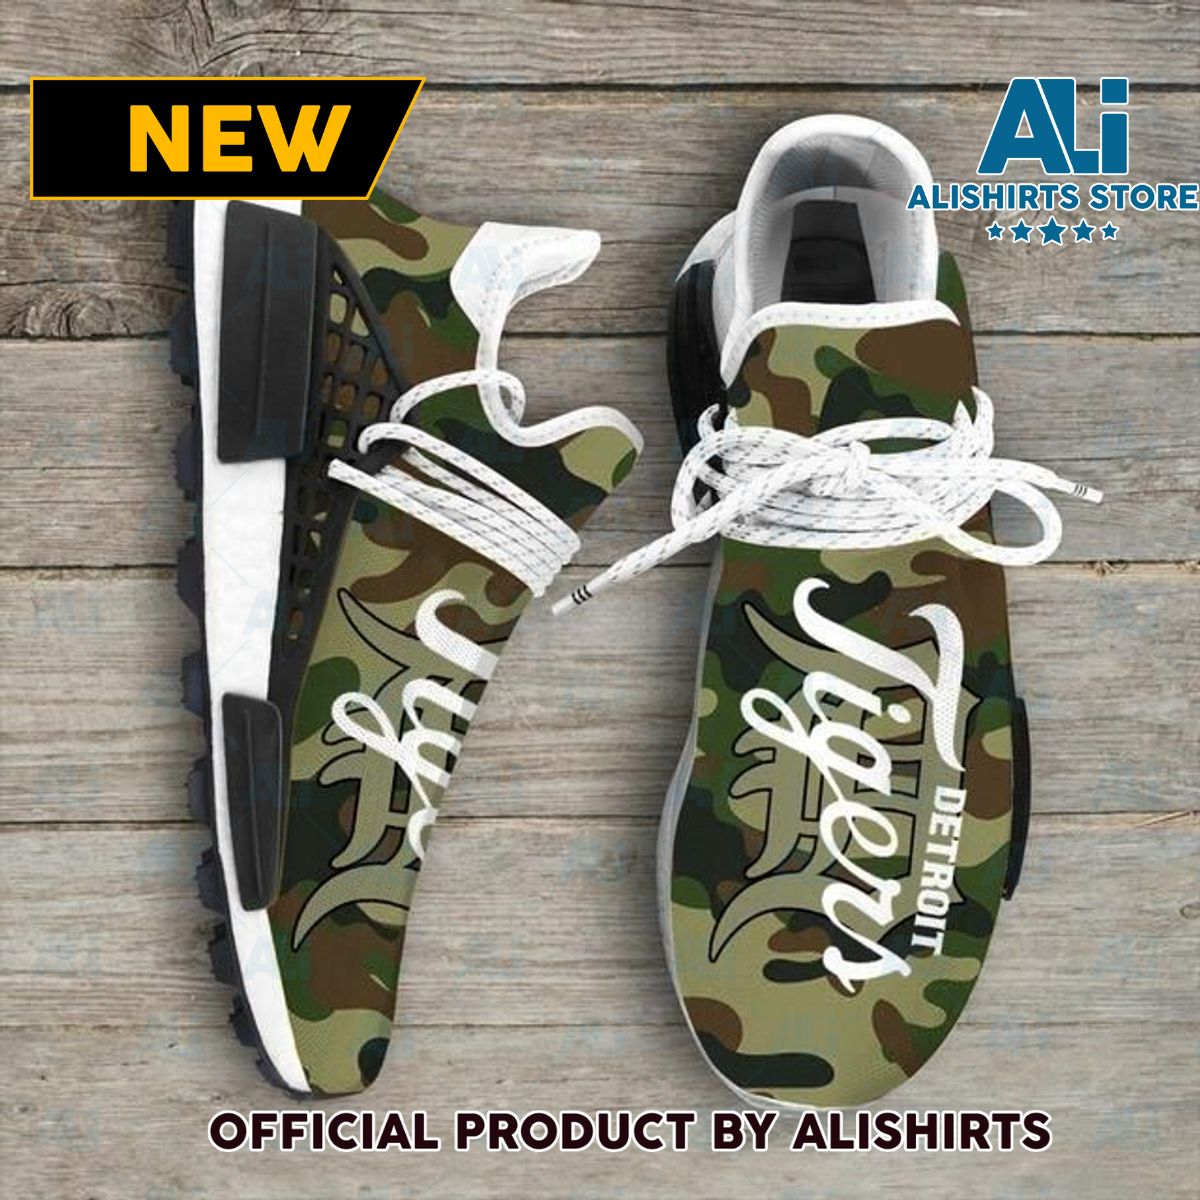 Camo Camouflage Detroit Tigers Mlb NMD Human Race shoes